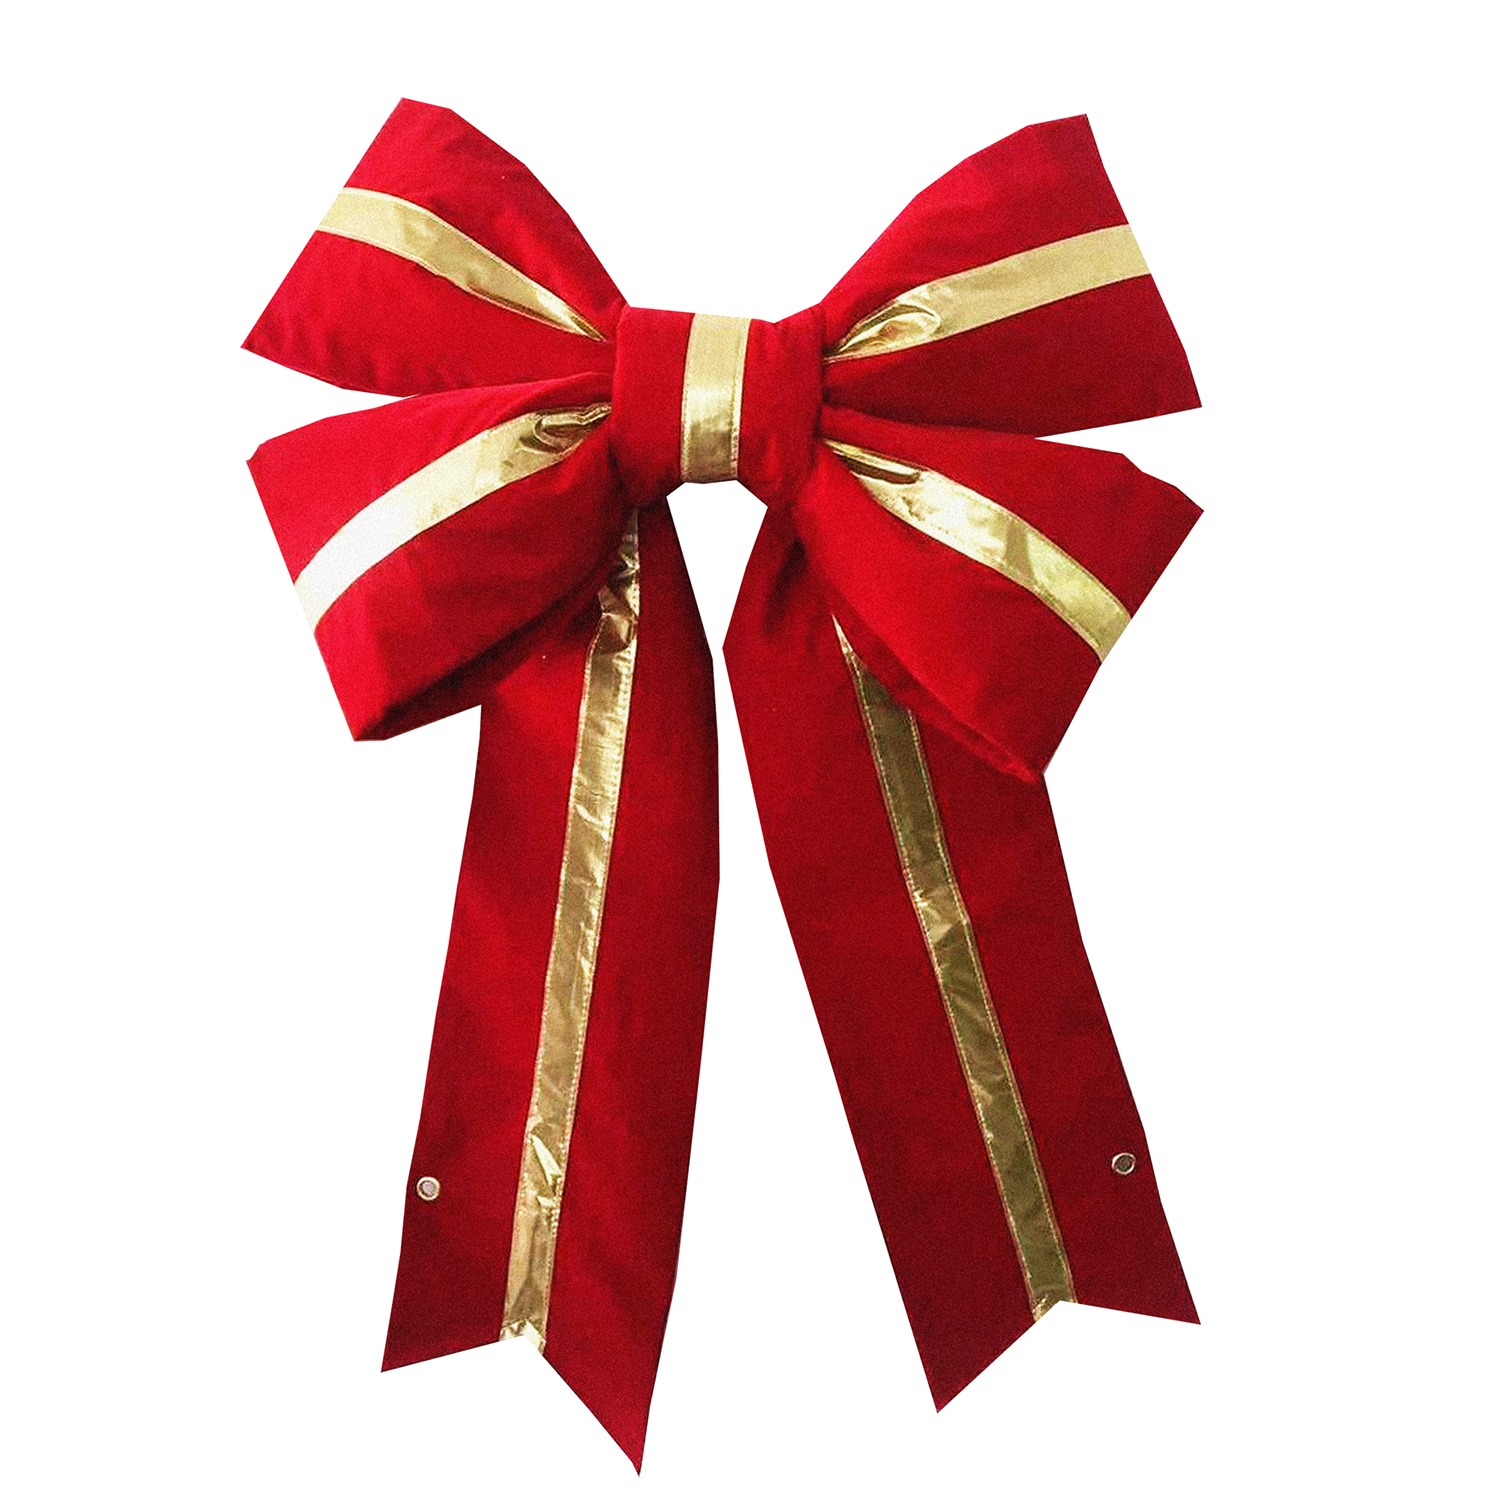  24 Pack Christmas Bows for Gift Wrapping Ribbon Gift Bows  Assorted Self Adhesive Christmas Bows Star Bows for Christmas Presents and  Holiday Gifts (Novelty,4 Inch) : Health & Household